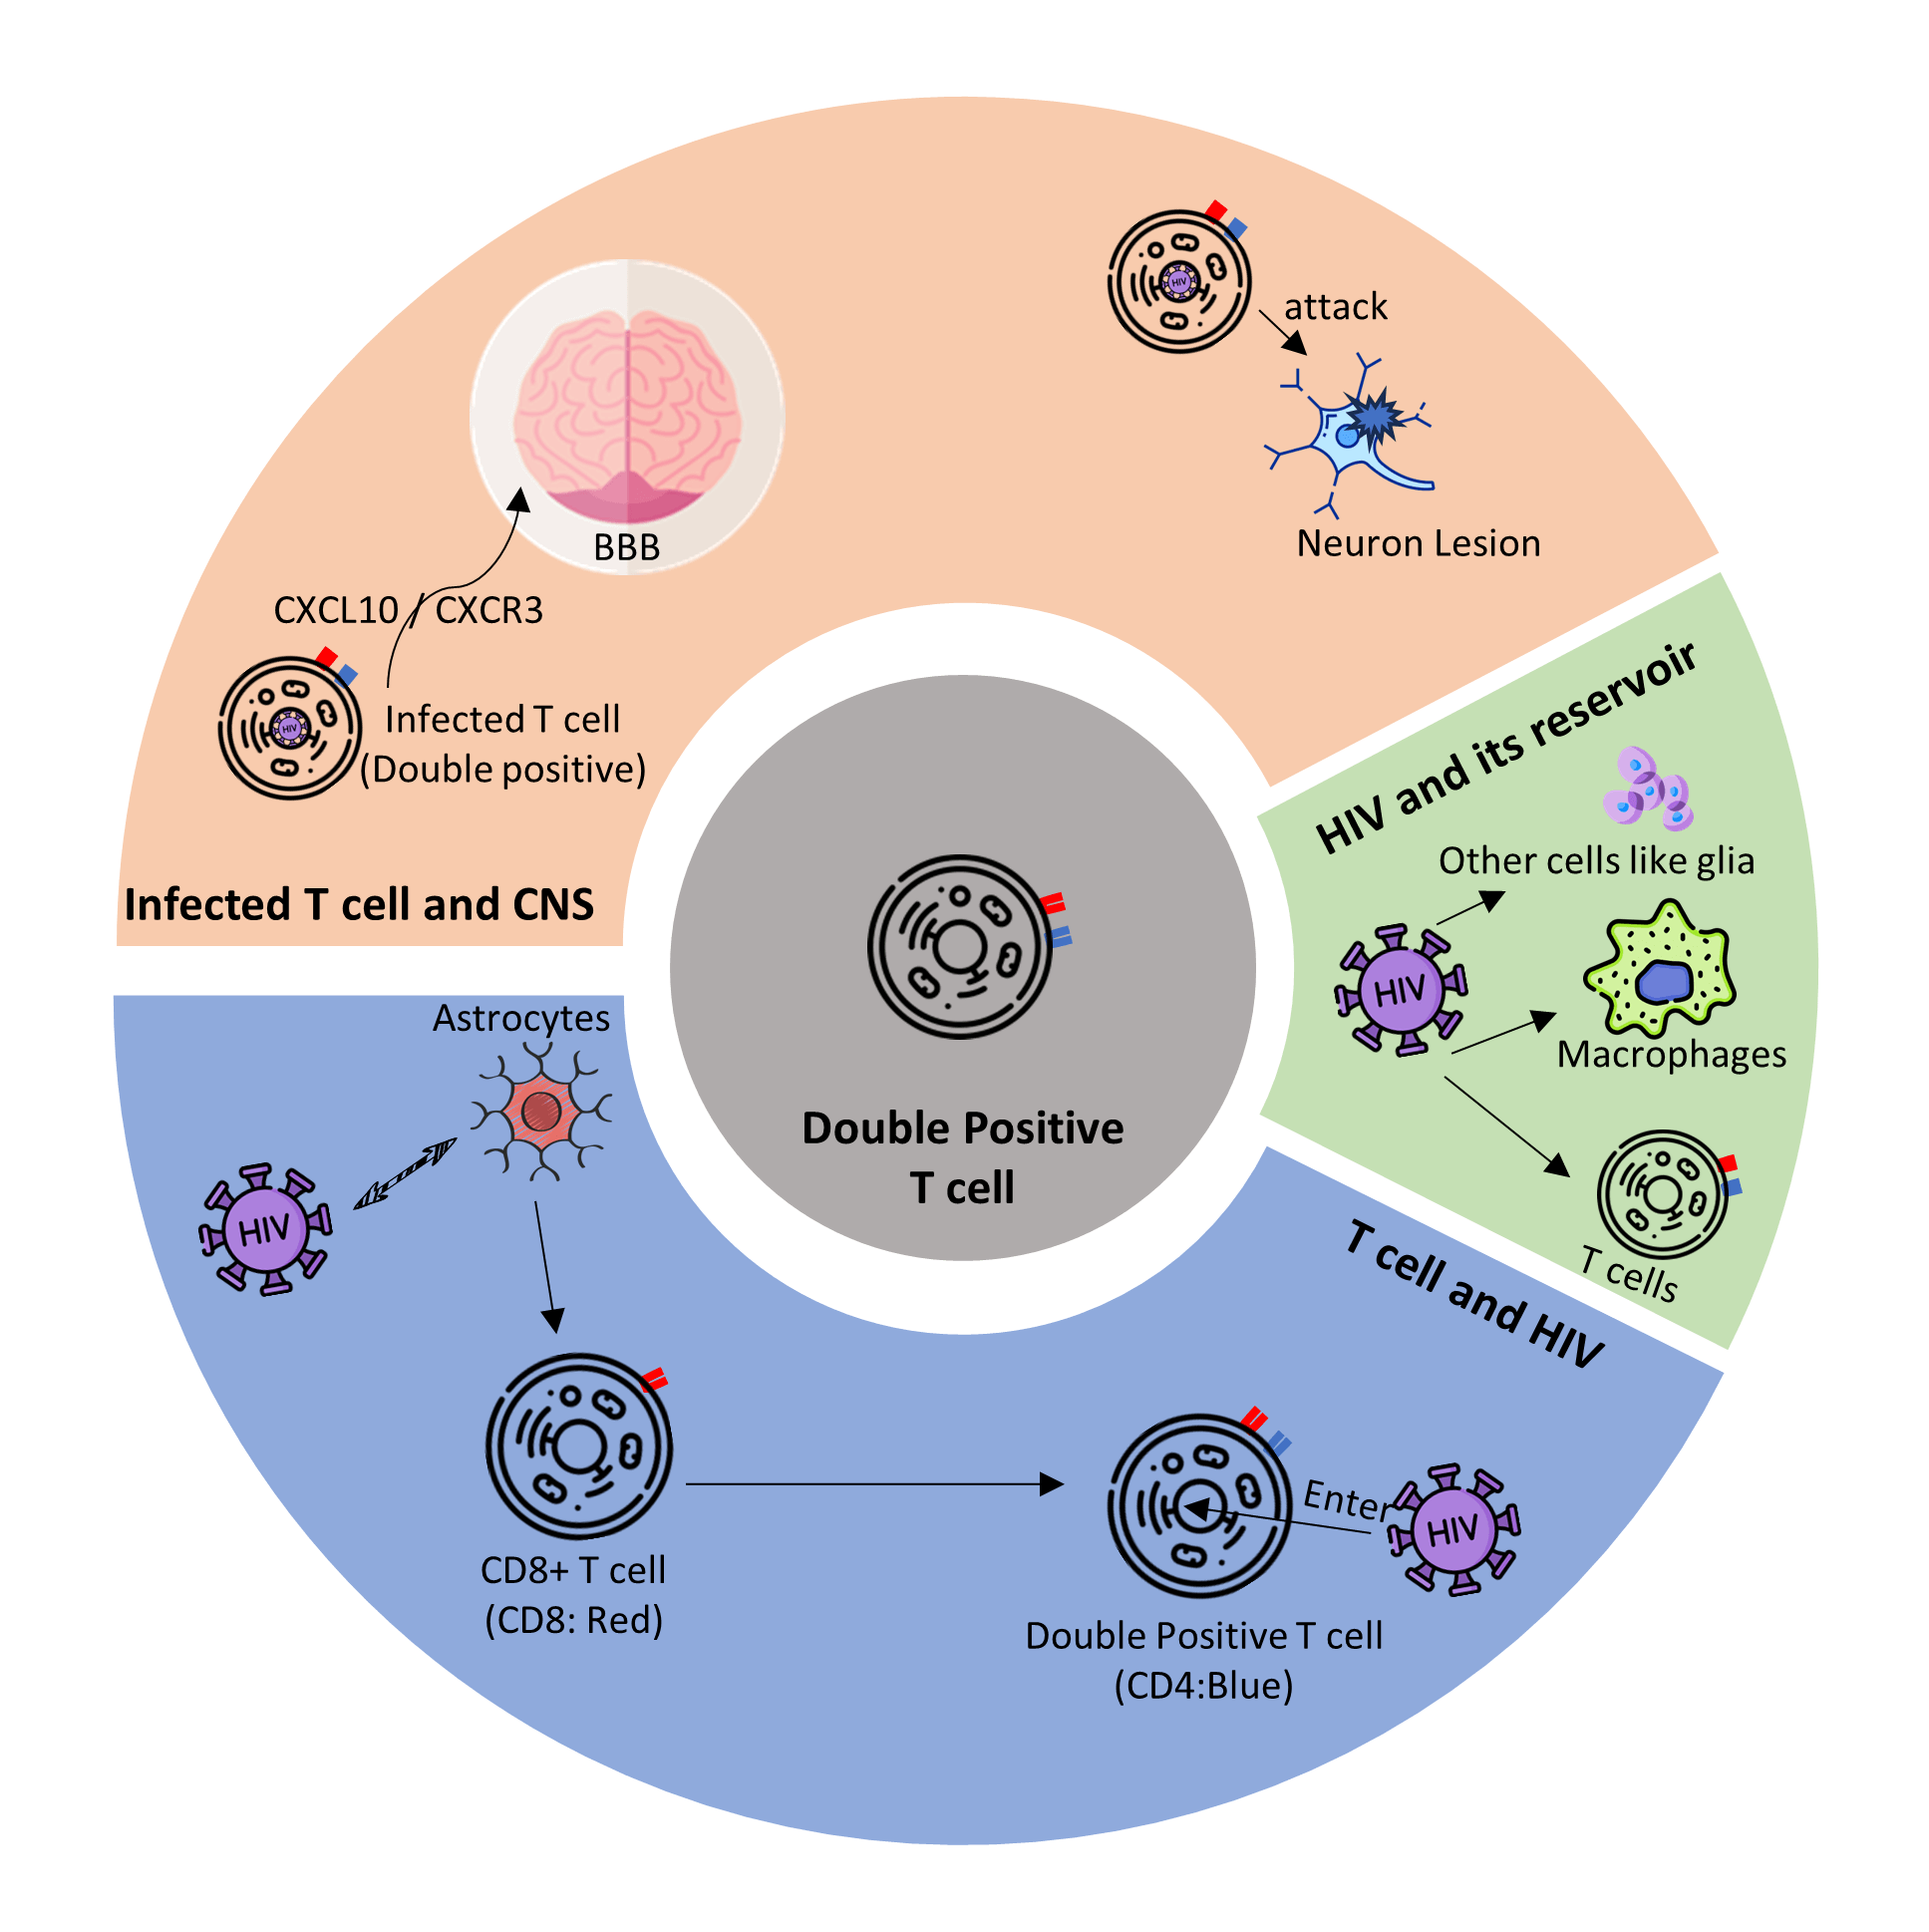 Reservoir of human immunodeficiency virus in the brain: New insights into the role of T cells